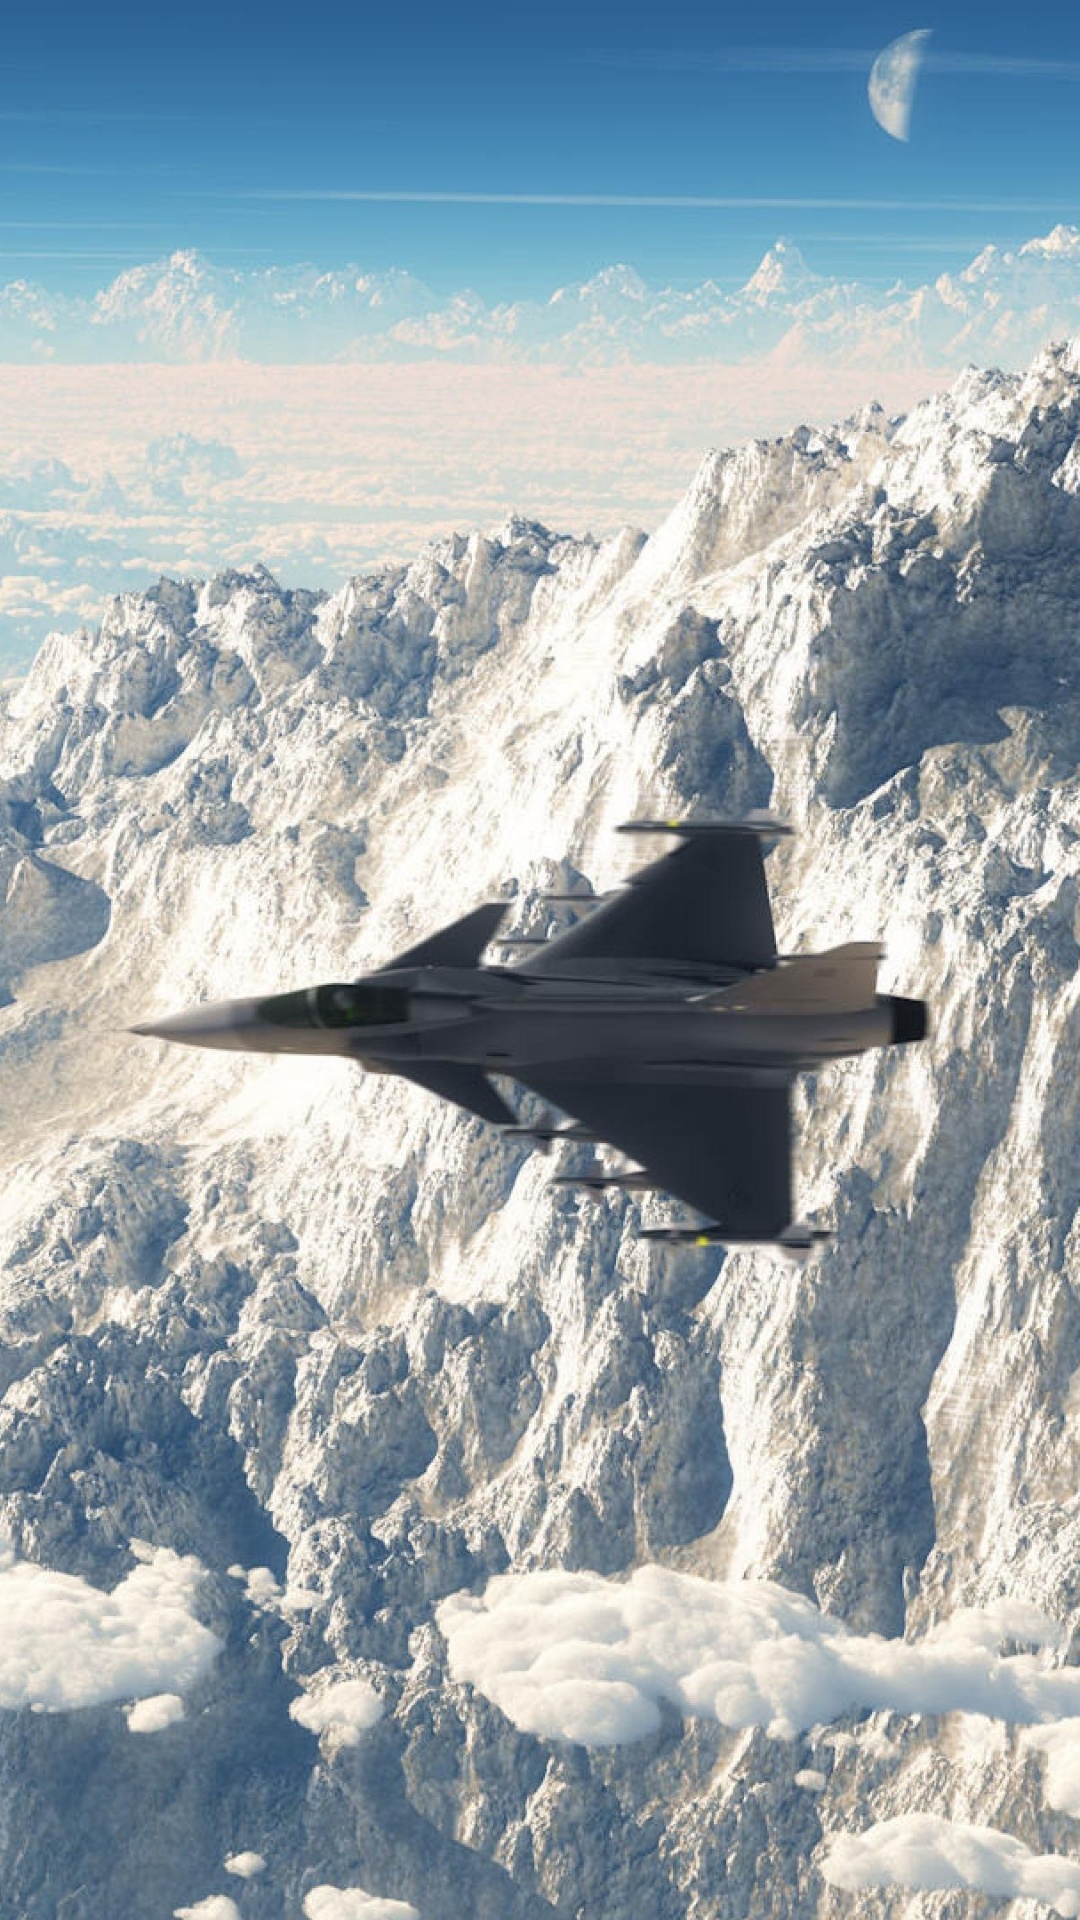 Black Fighter Plane Flying Over Snow Covered Mountain During Daytime. Wallpaper in 1080x1920 Resolution